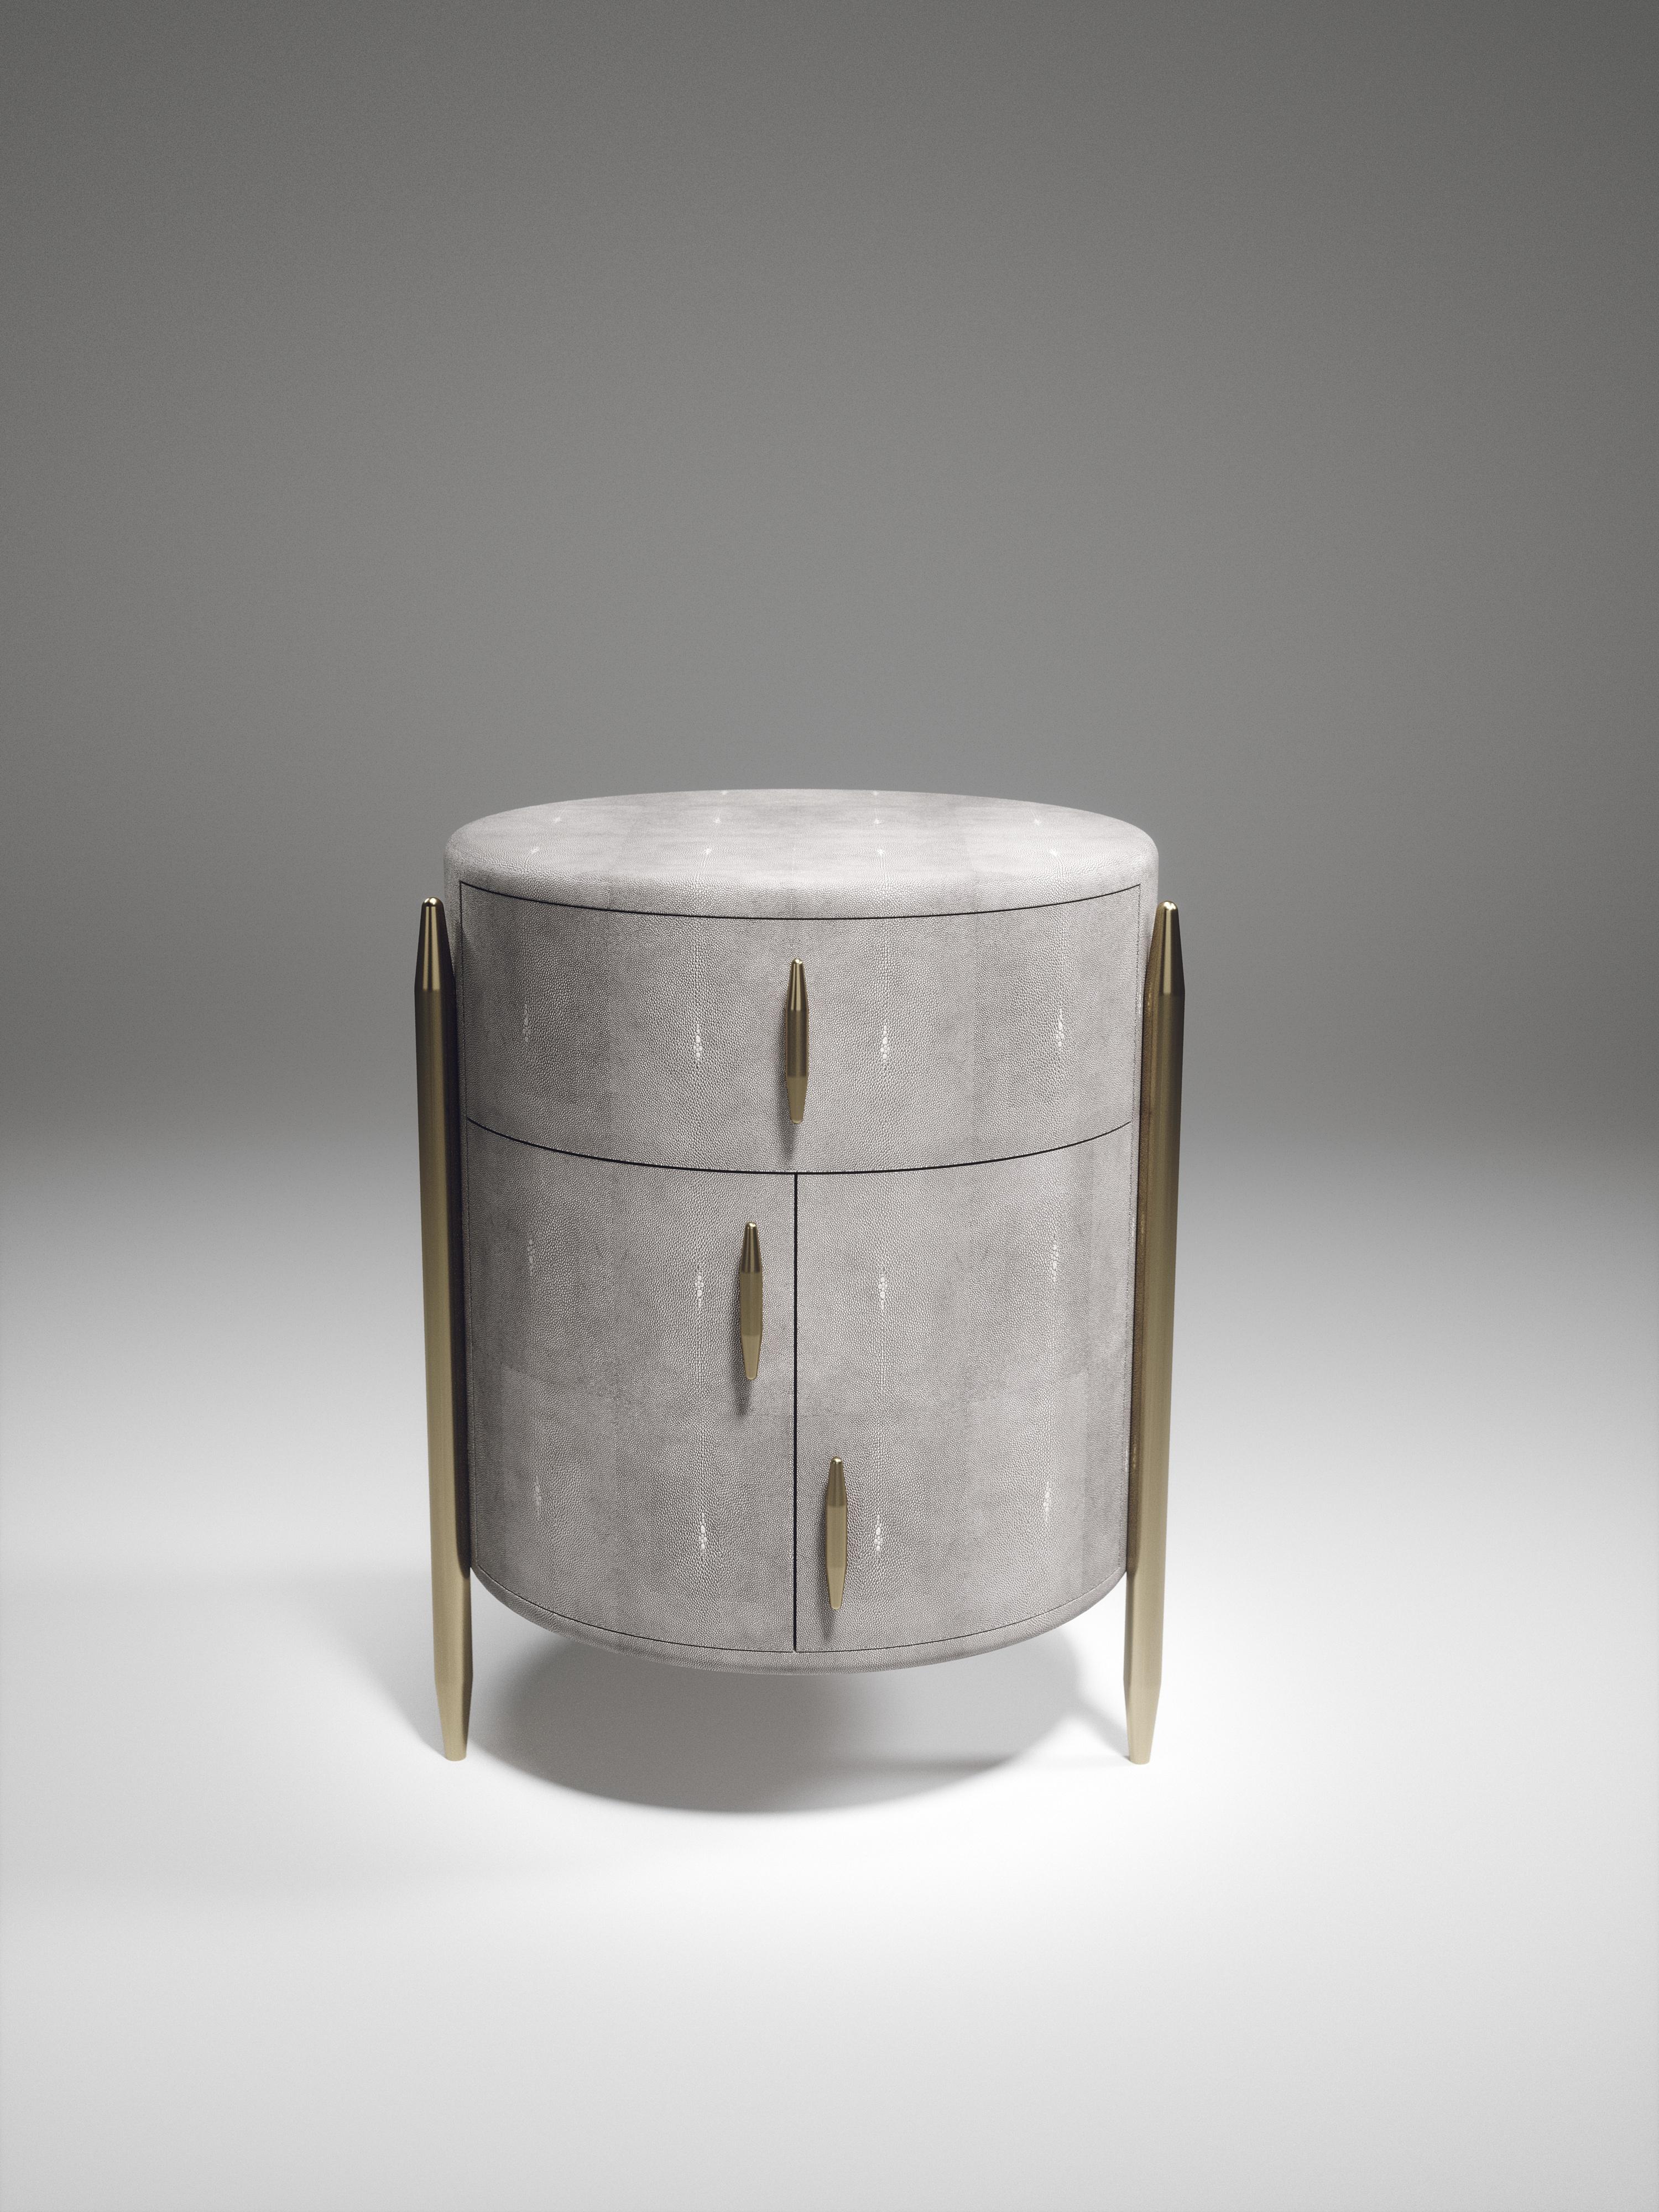 The Dandy round bedside table by Kifu Paris is an elegant and a luxurious home accent, inlaid in light grey shagreen with bronze-patina brass details. This piece includes 1 drawer total and a cabinet below; the interiors are inlaid in gemelina wood